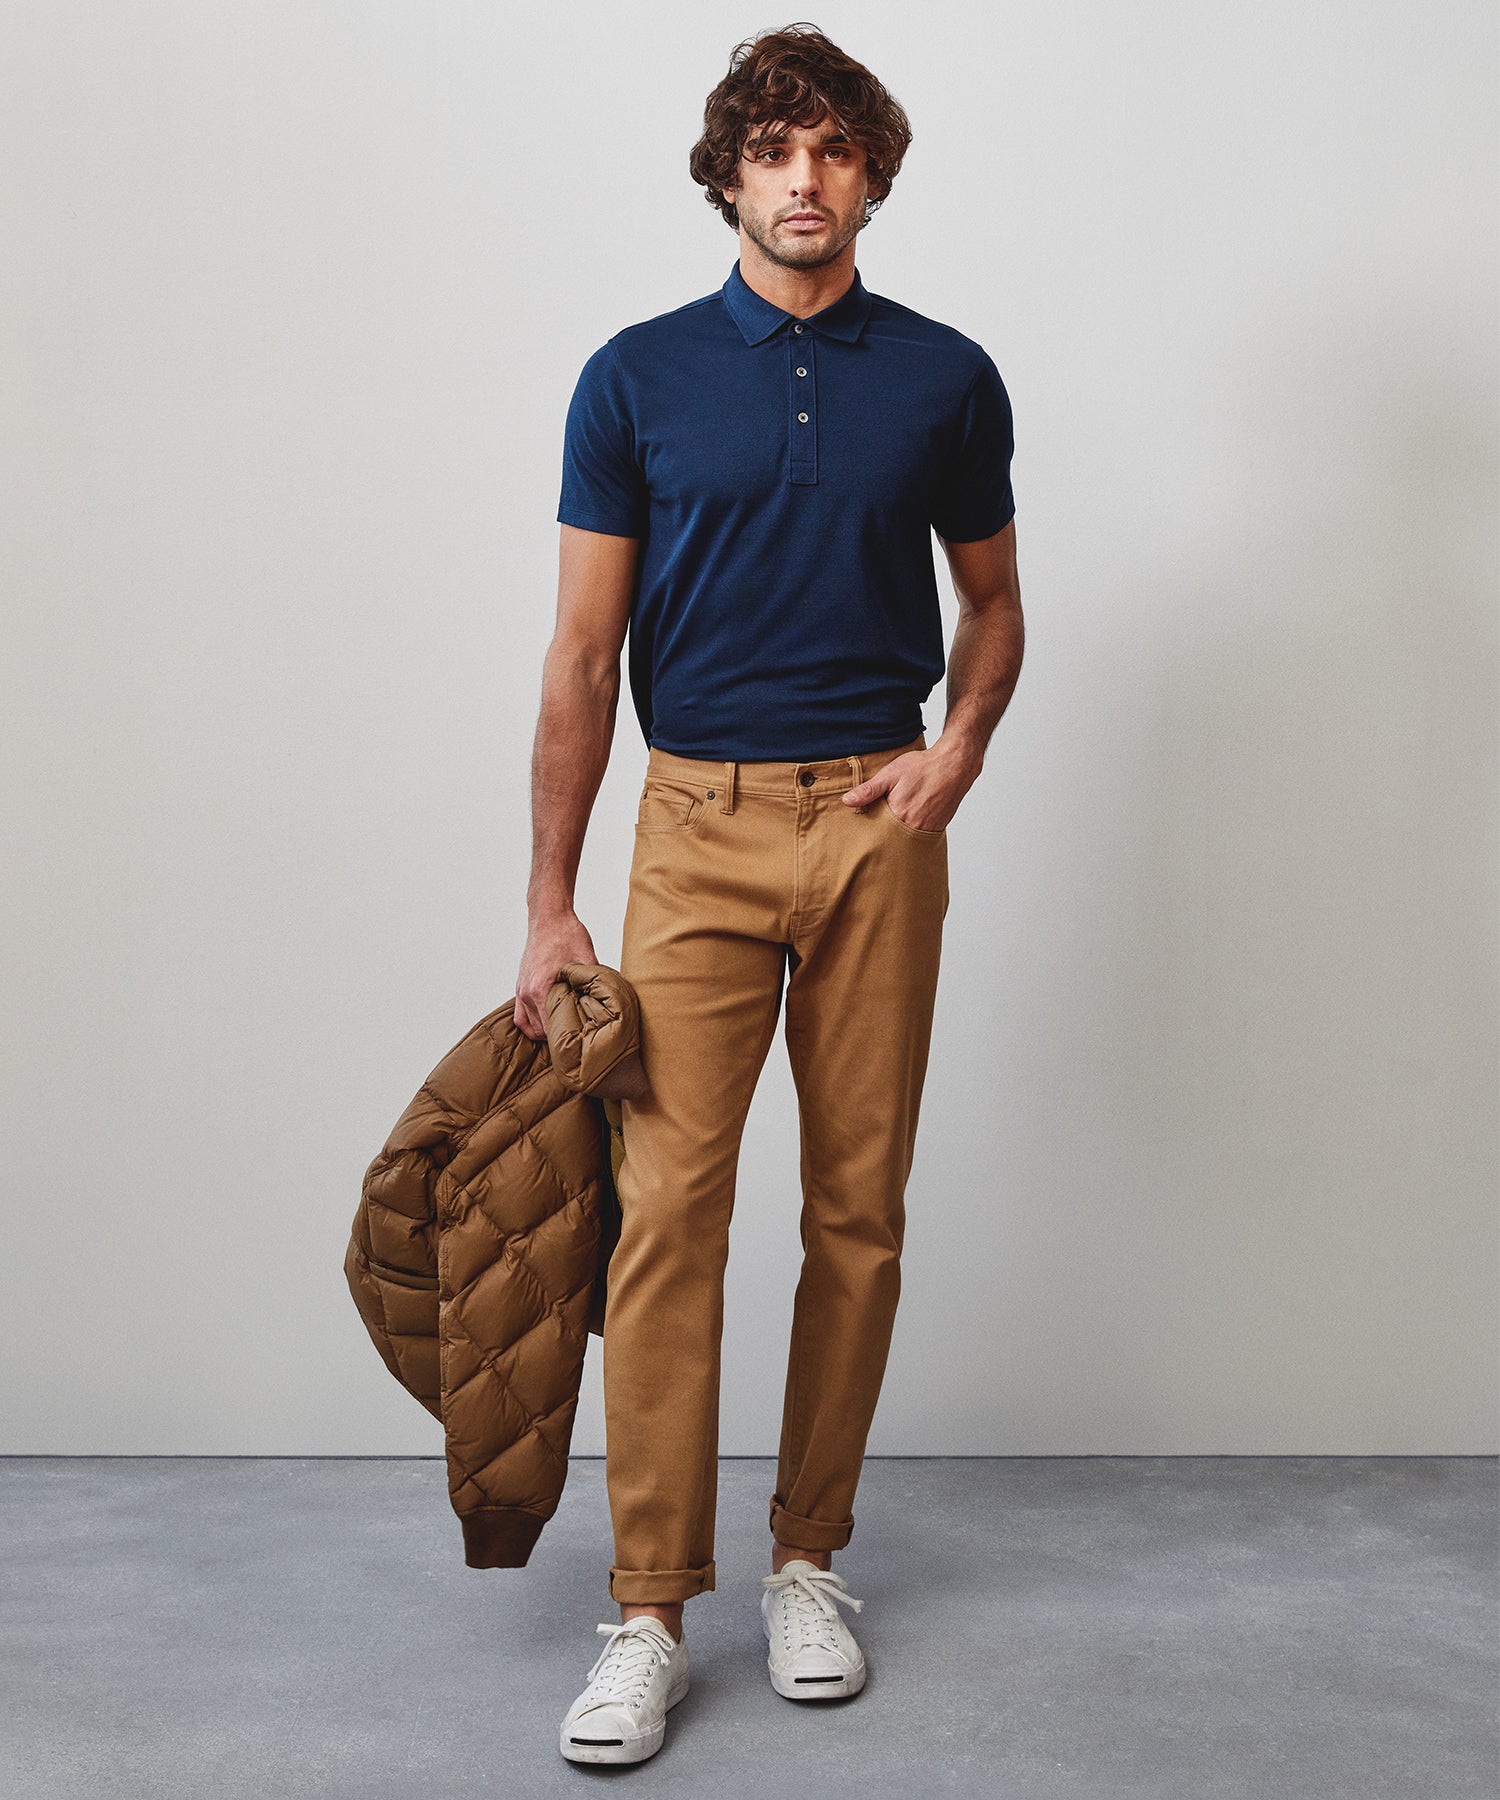 Regular fit: chino-style cloth trousers - dark brown